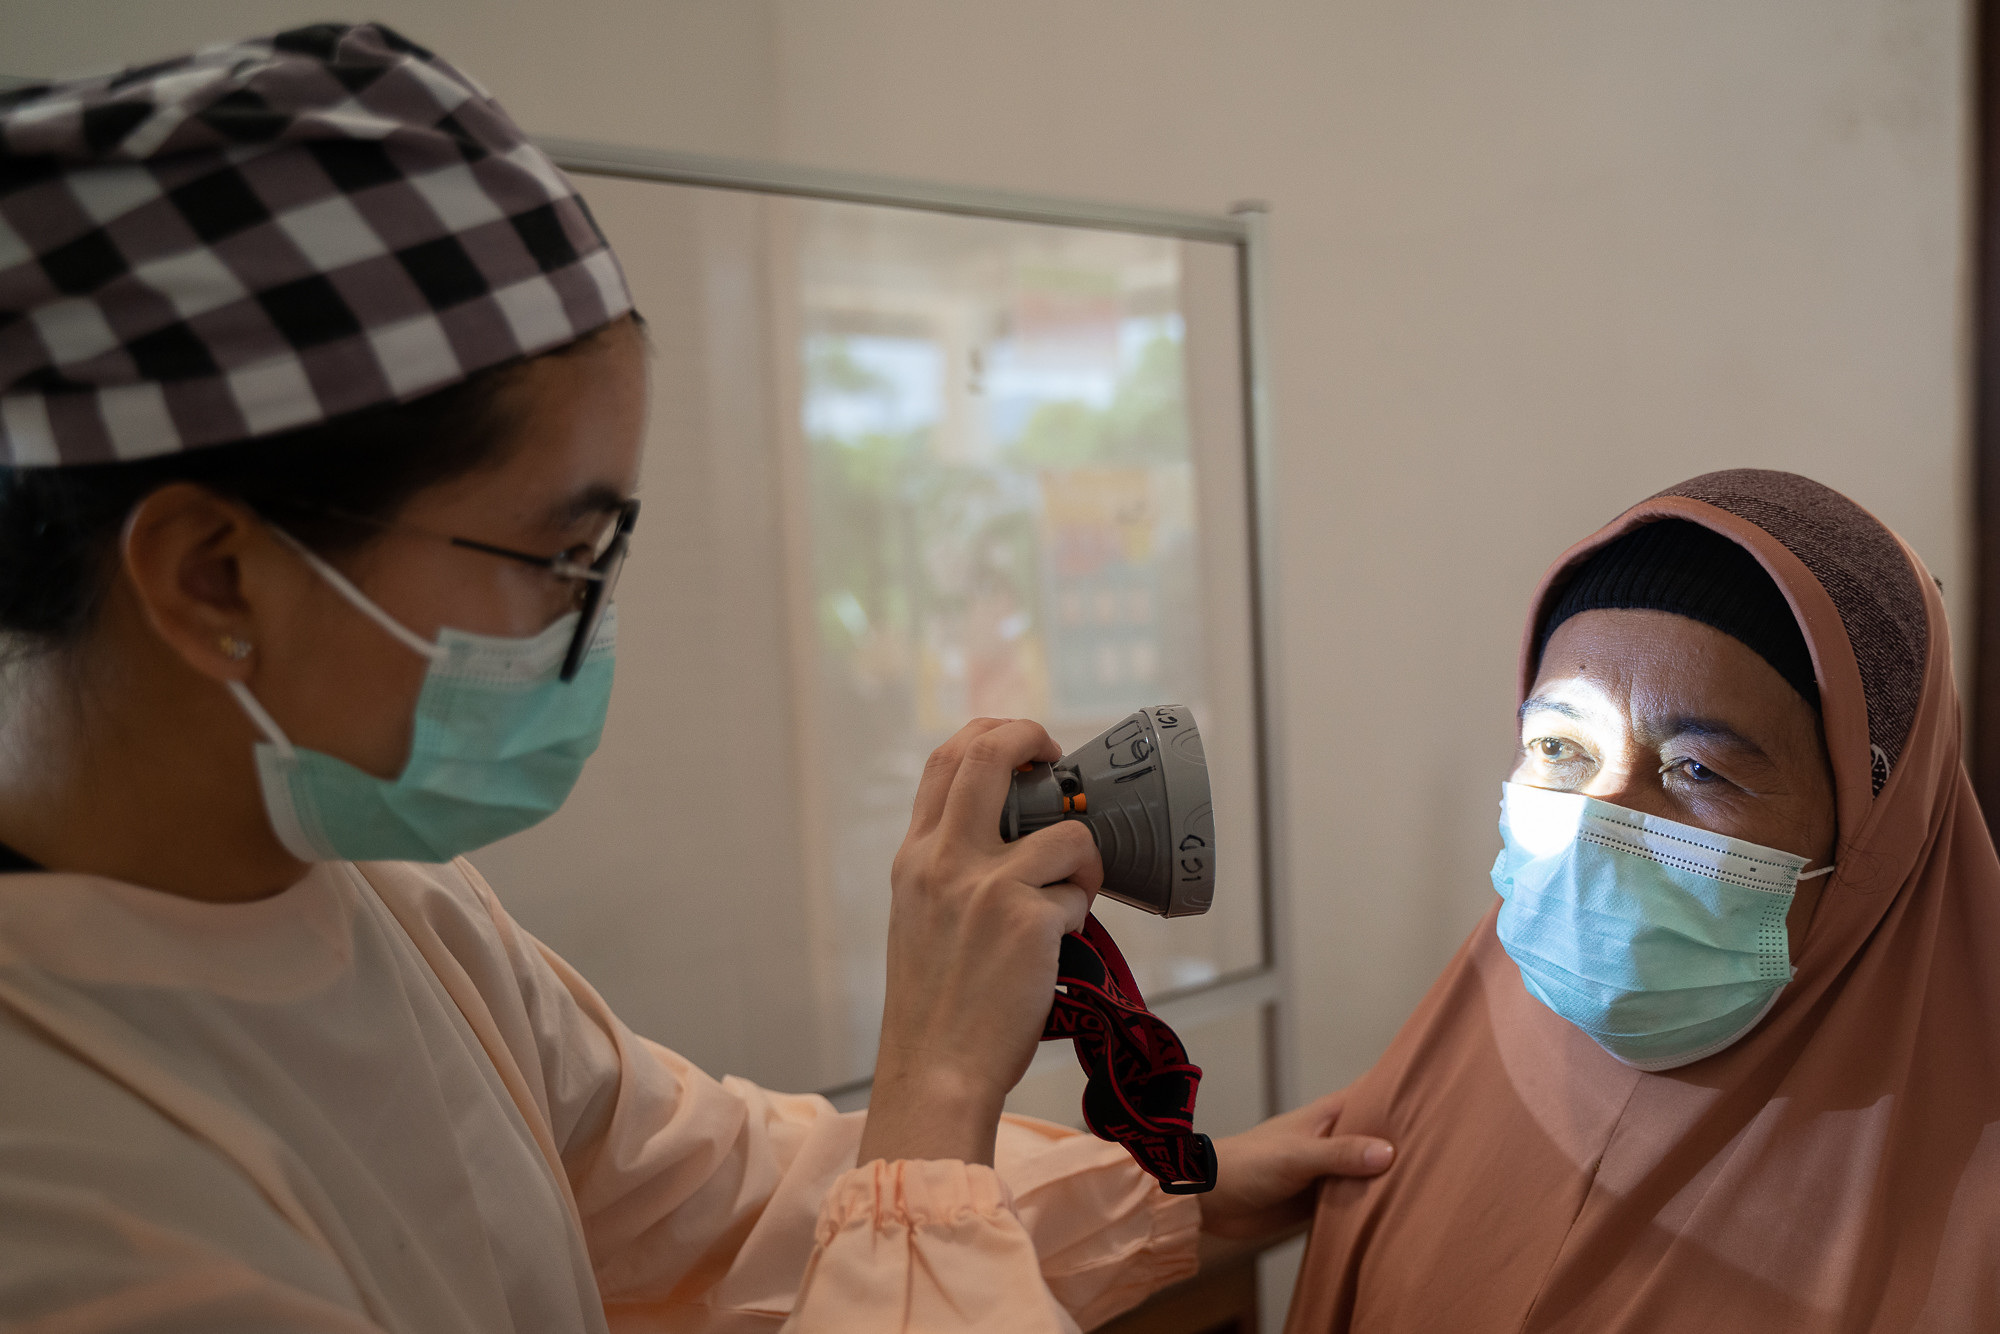 Optometry services are provided as a part of routine care at Alam Sehat Lestari (ASRI) Medical Center in Sukadana, West Kalimantan, Indonesia